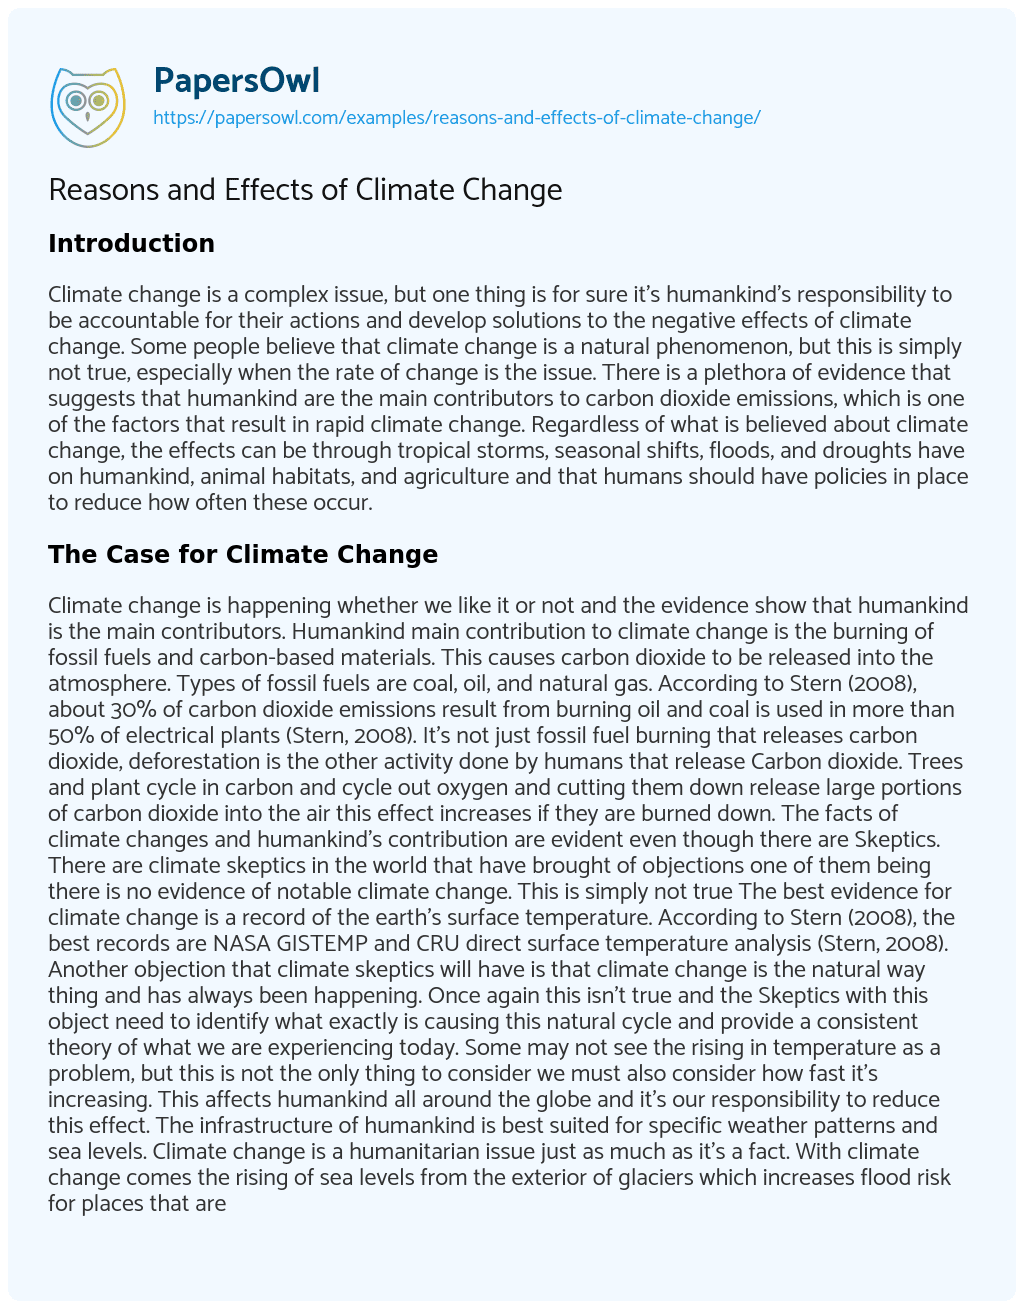 Essay on Reasons and Effects of Climate Change